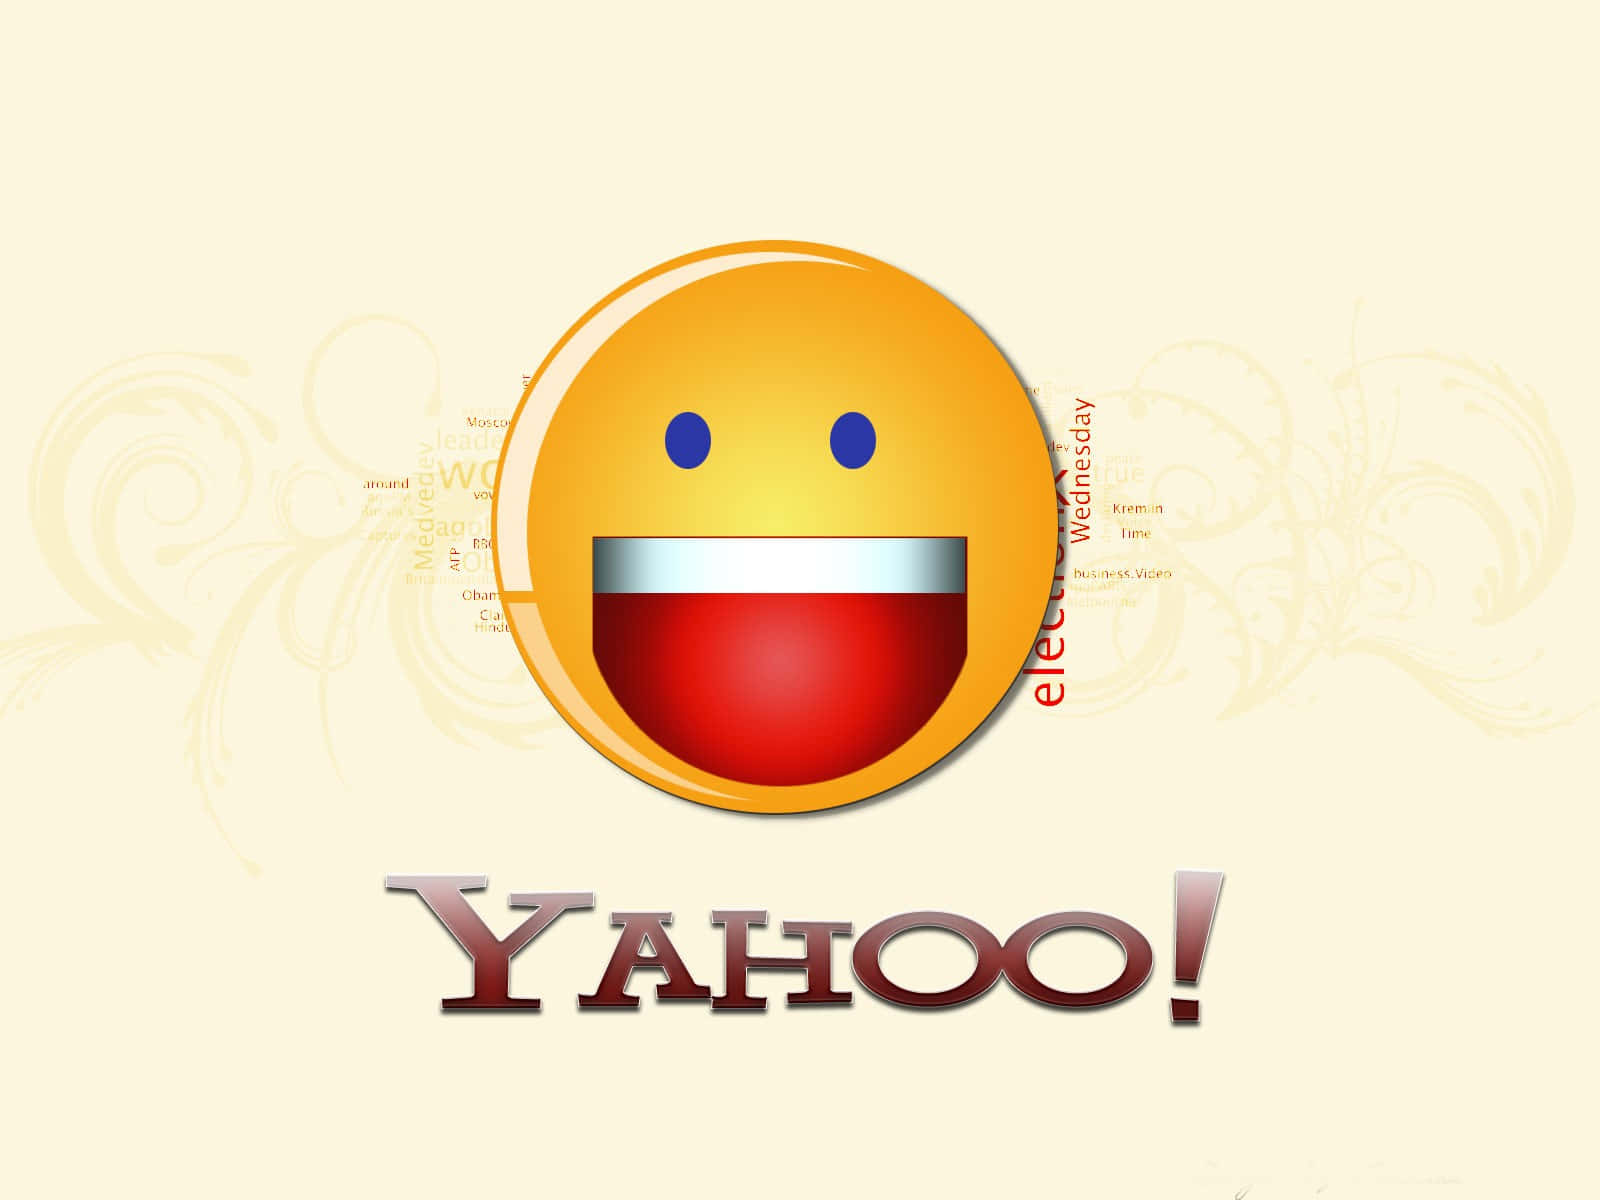 Embark On Your Journey With Yahoo!